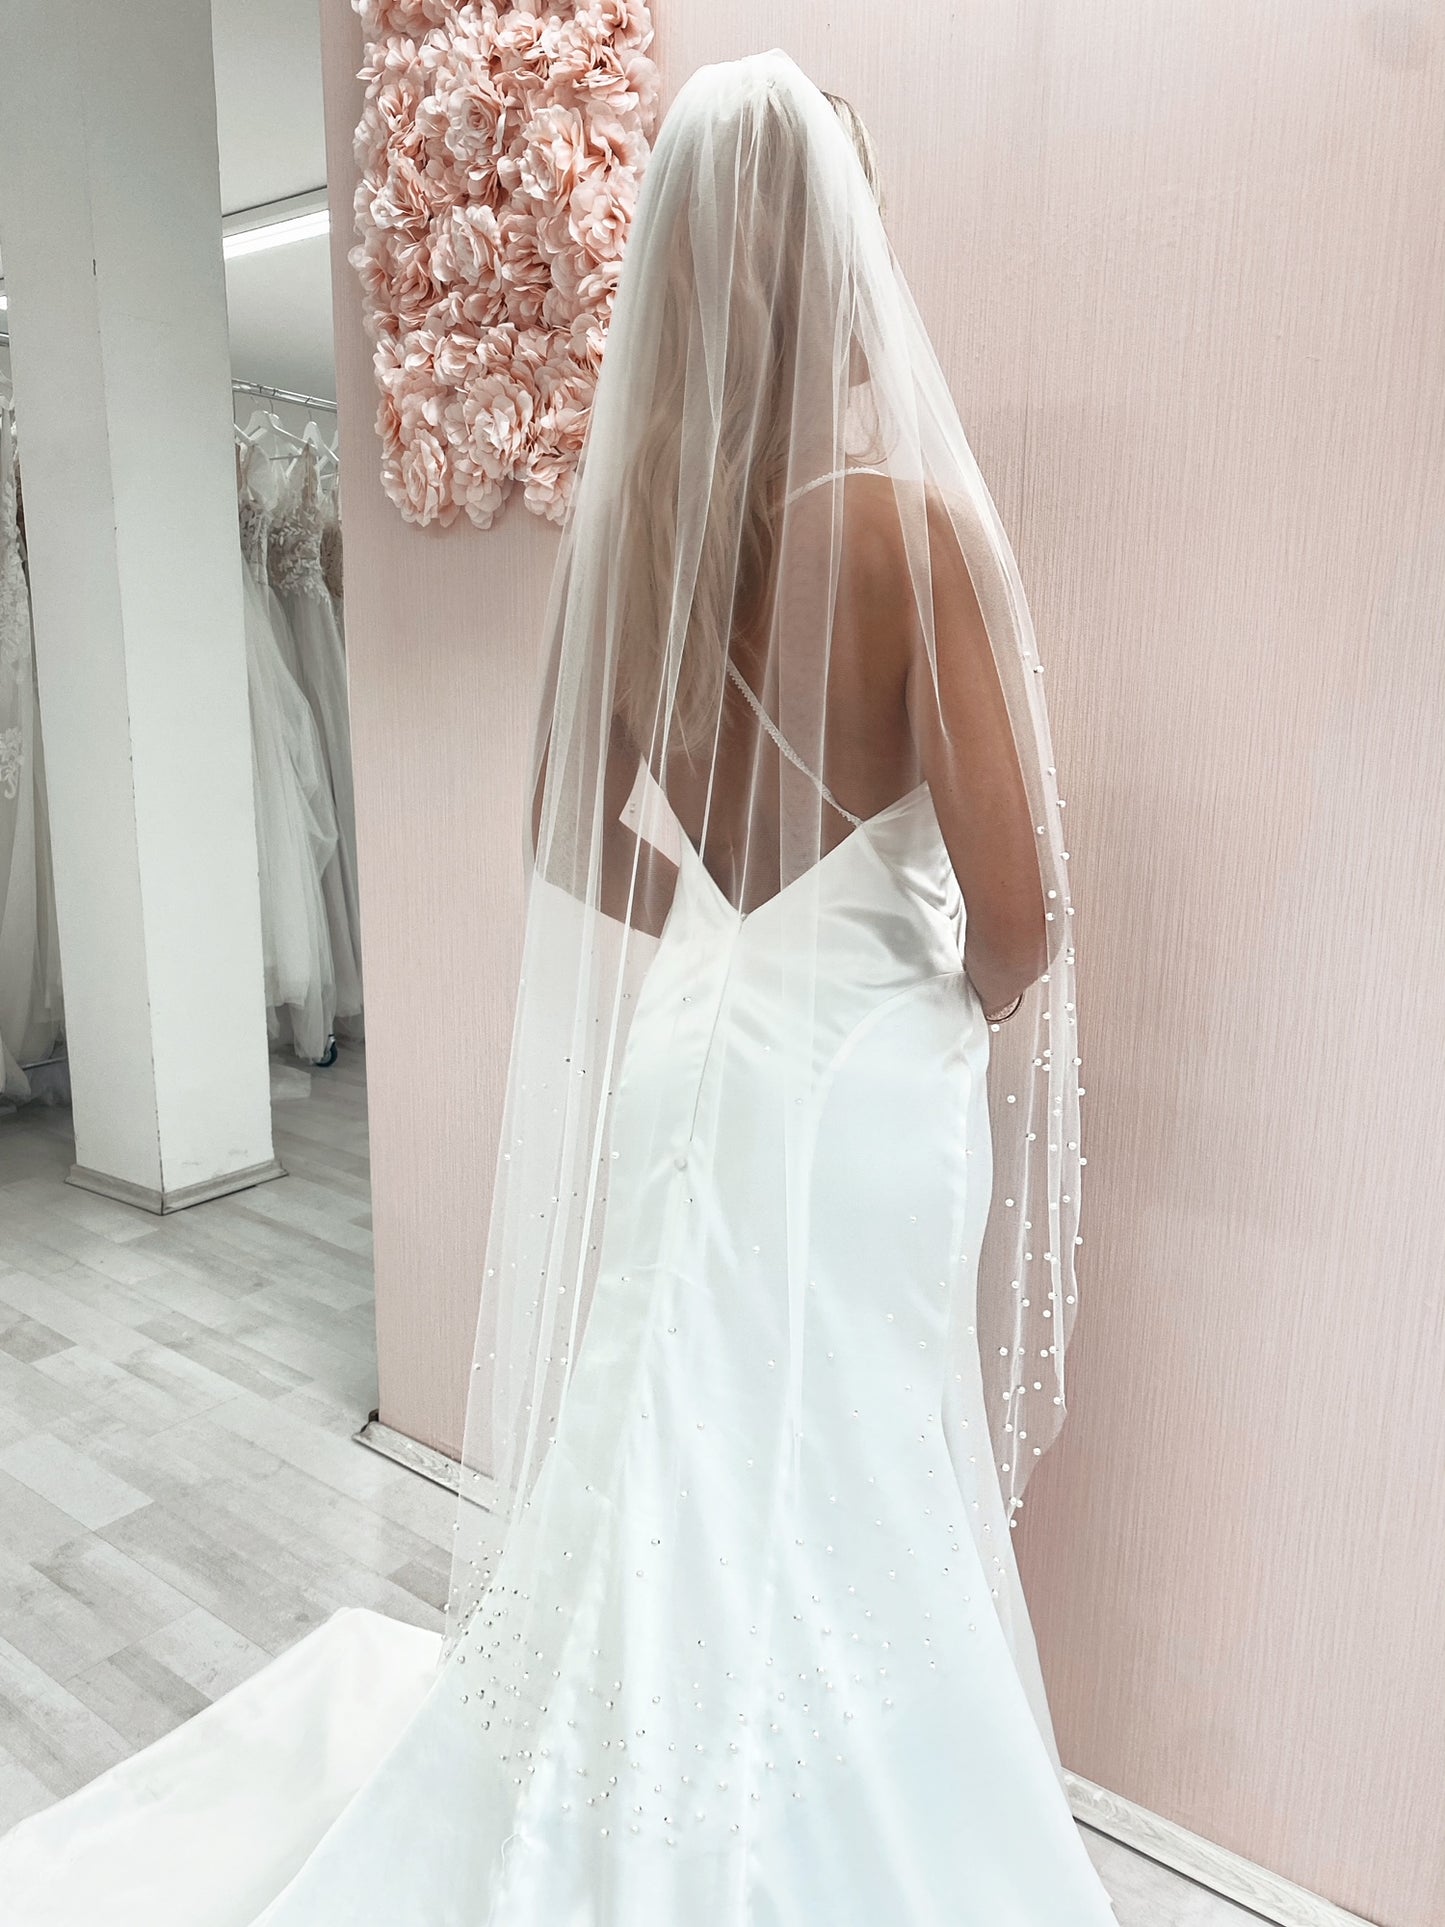 Ombre Fading Pearl Wedding Veil, One Tiar Veil with Faded Pearls, Ombr –  Pet-Jos Bridal